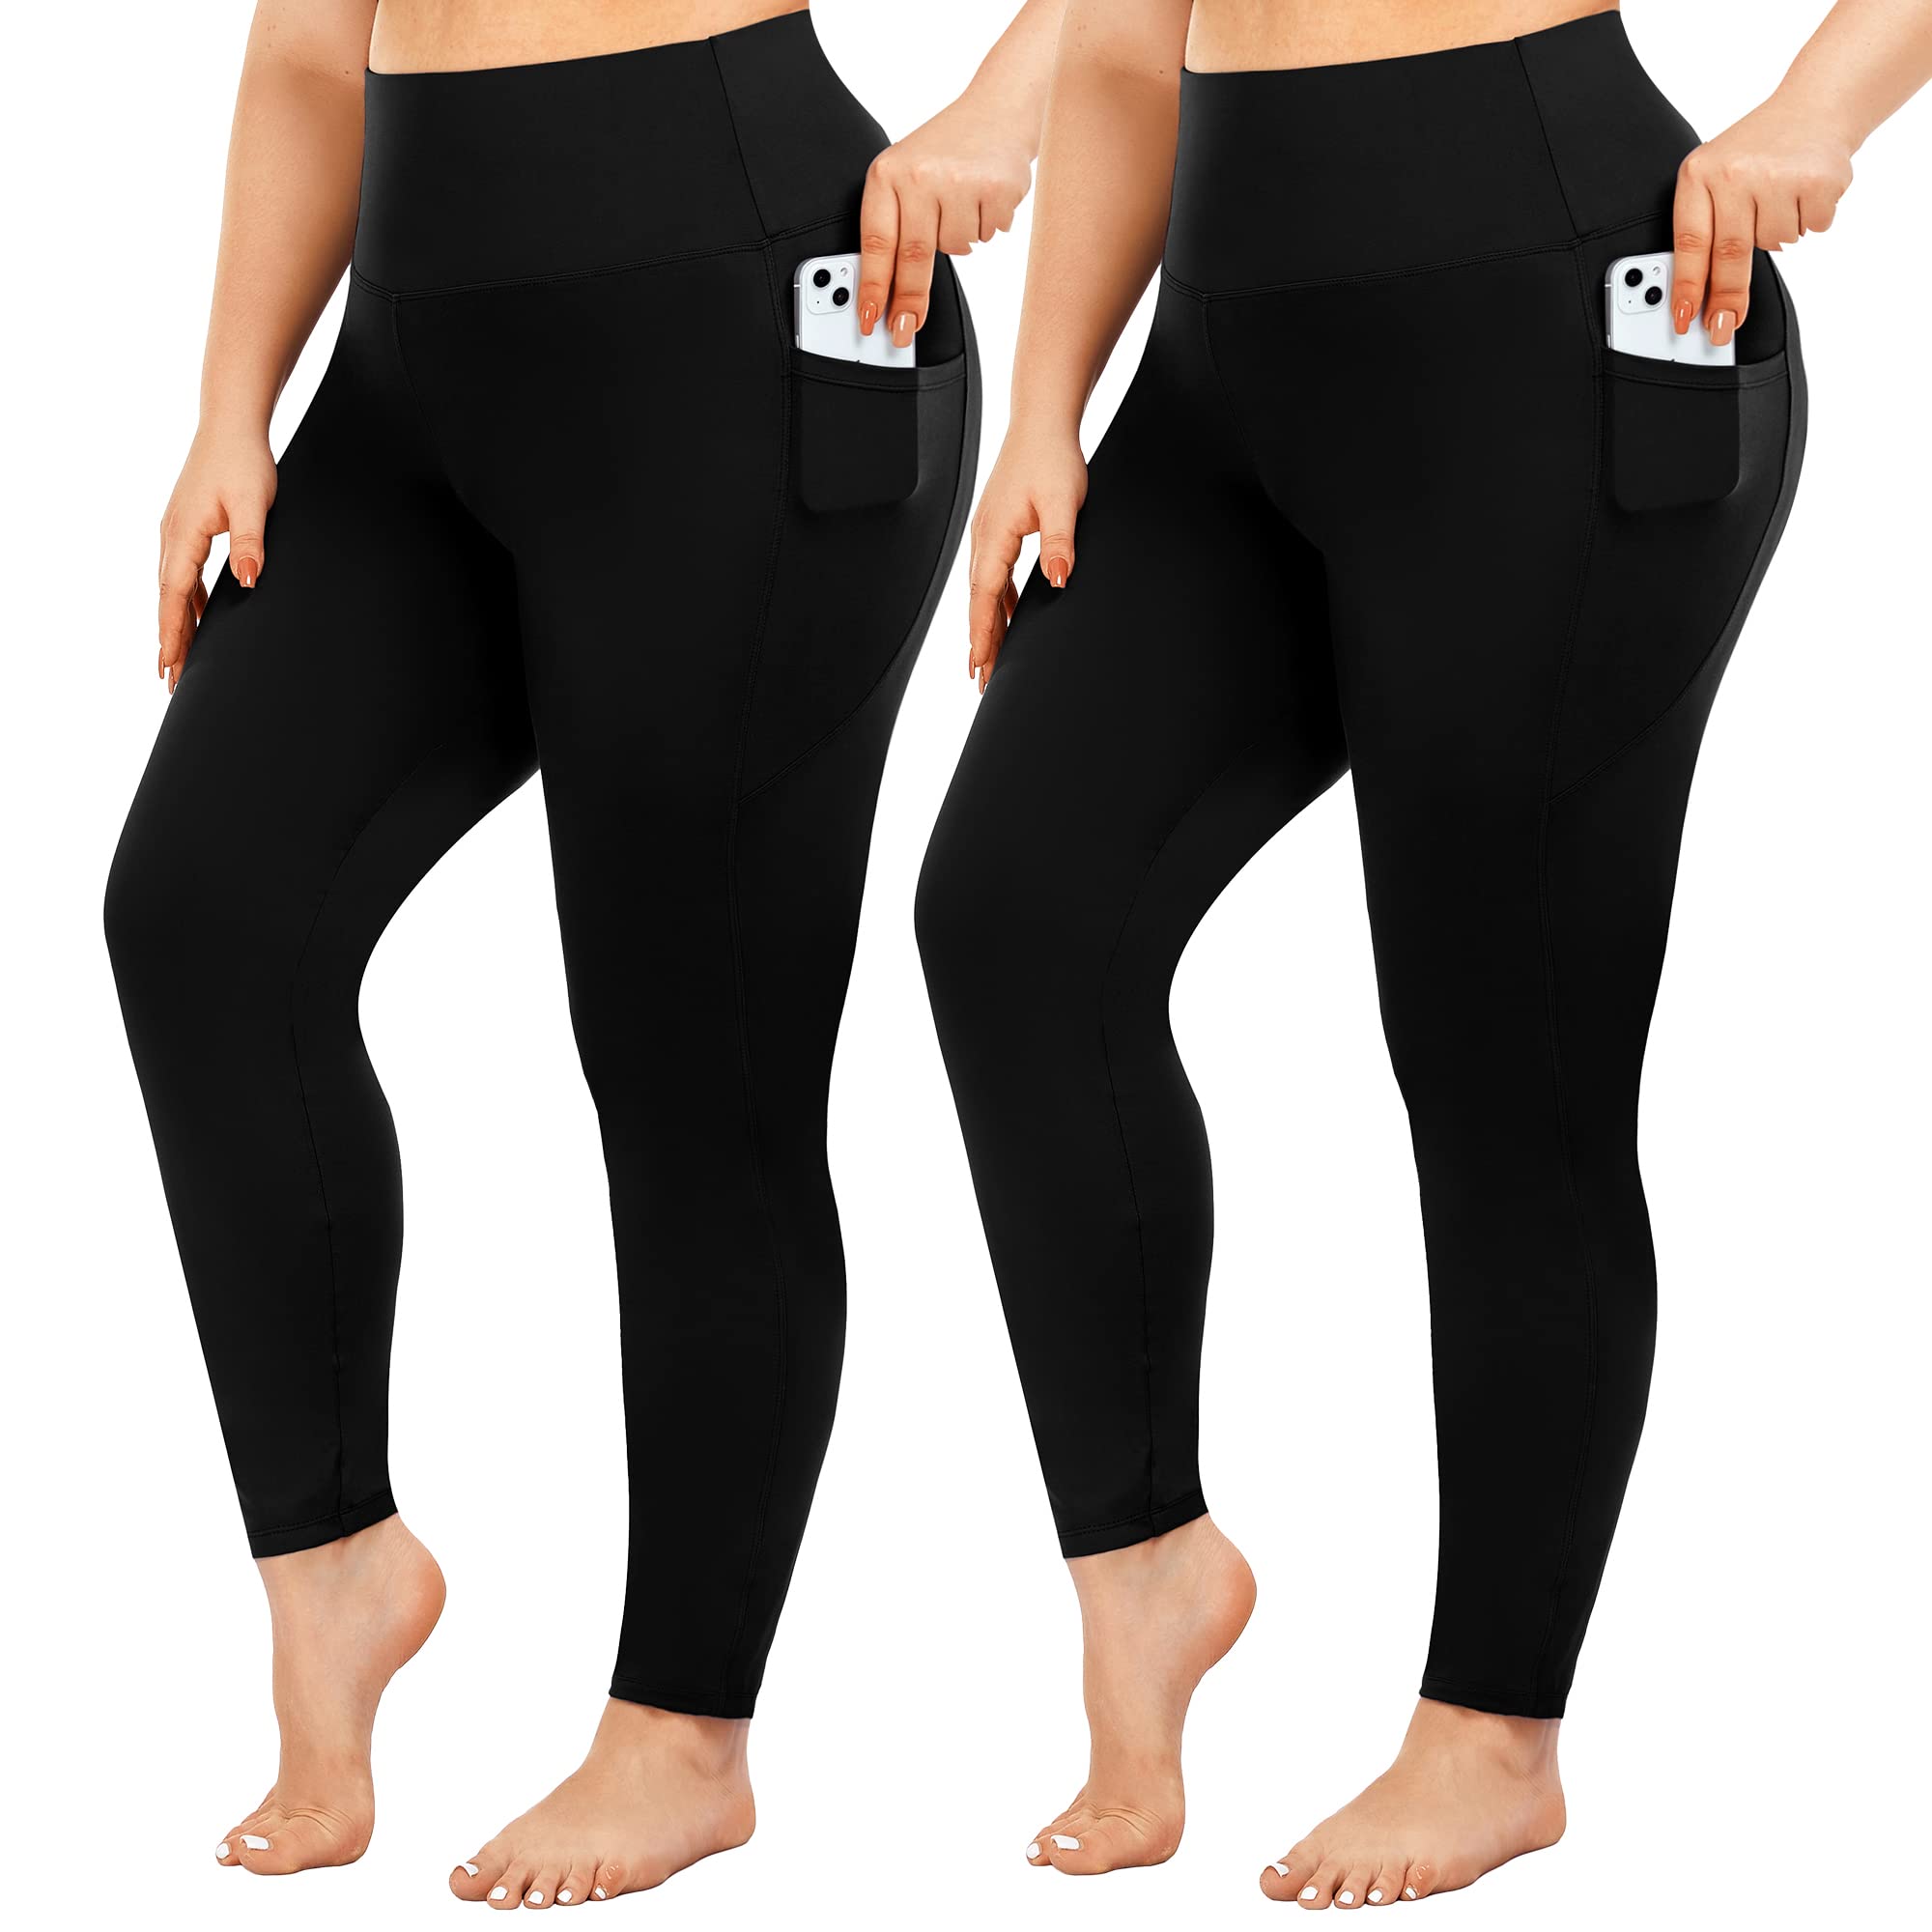 ALONG FIT High Waisted Leggings-Yoga-Pants with Pockets for Women Workout  Tummy Control Leggings Sport Running Tights Black (High Waist-Black,  XX-Large), Pants -  Canada